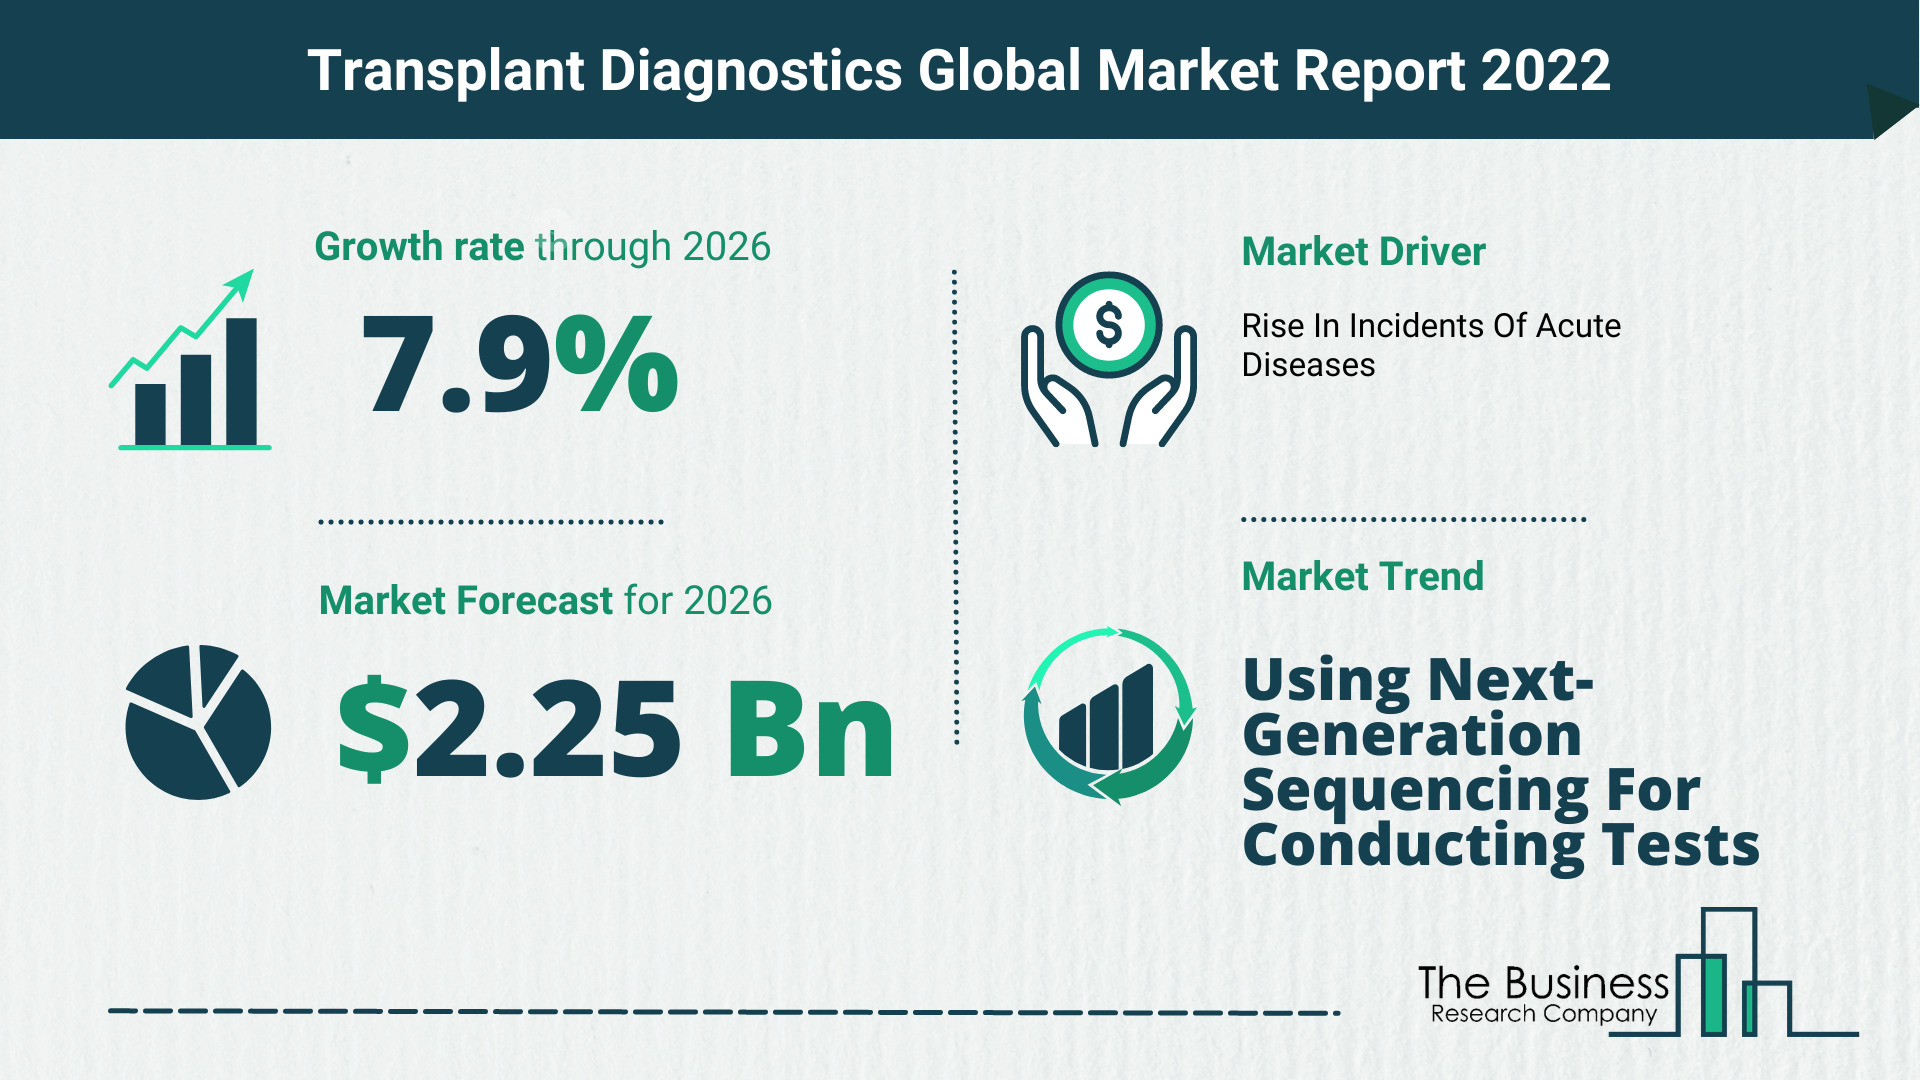 What Is The Transplant Diagnostics Market Overview In 2022?